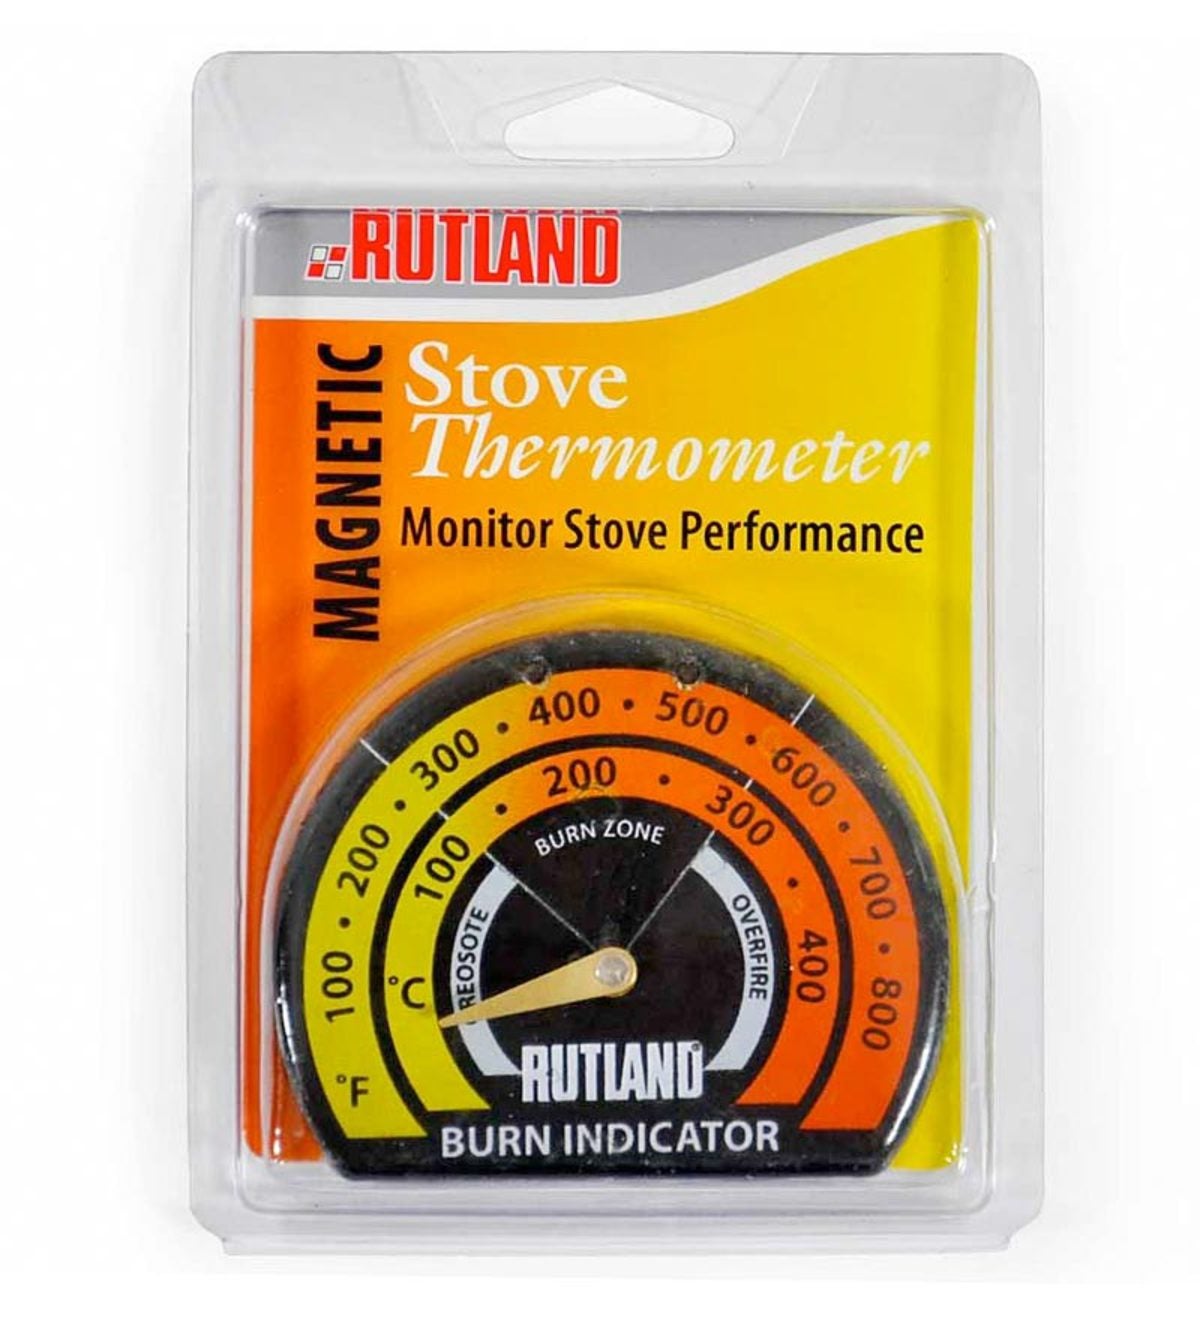 Stove Top Thermometer for Woodstoves - Product Info